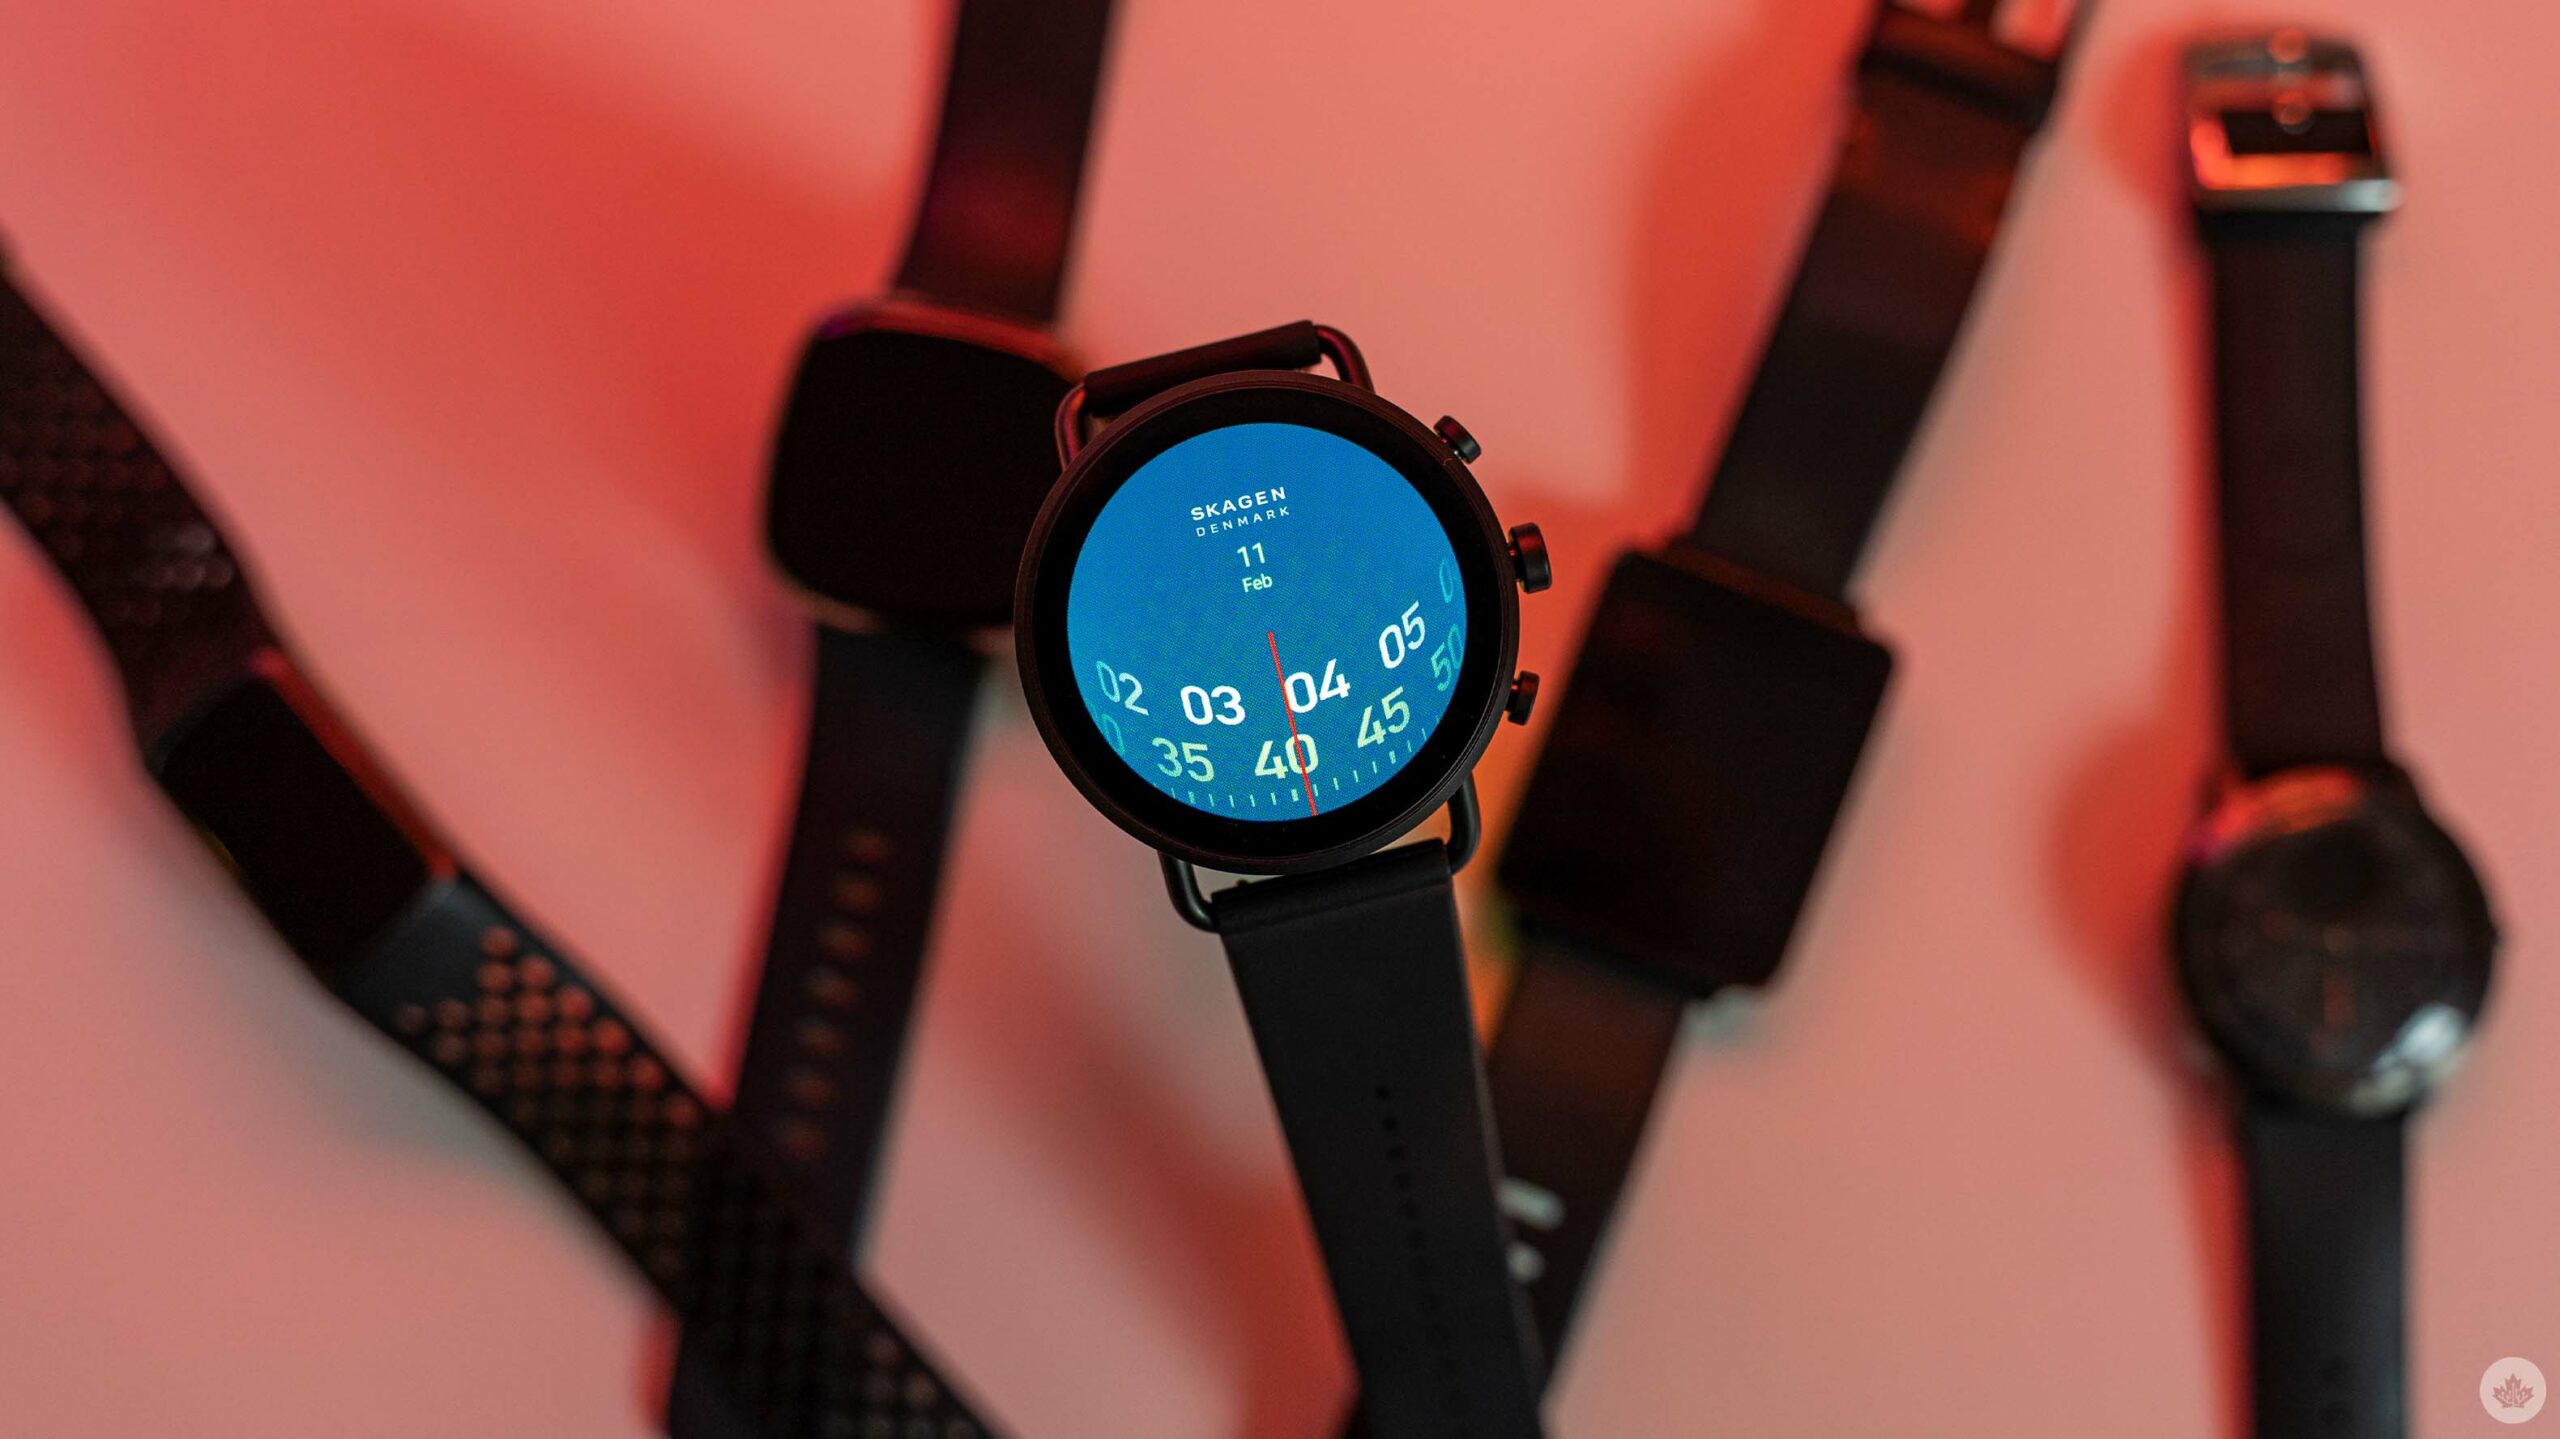 Fossil is officially done making Wear OS smartwatches